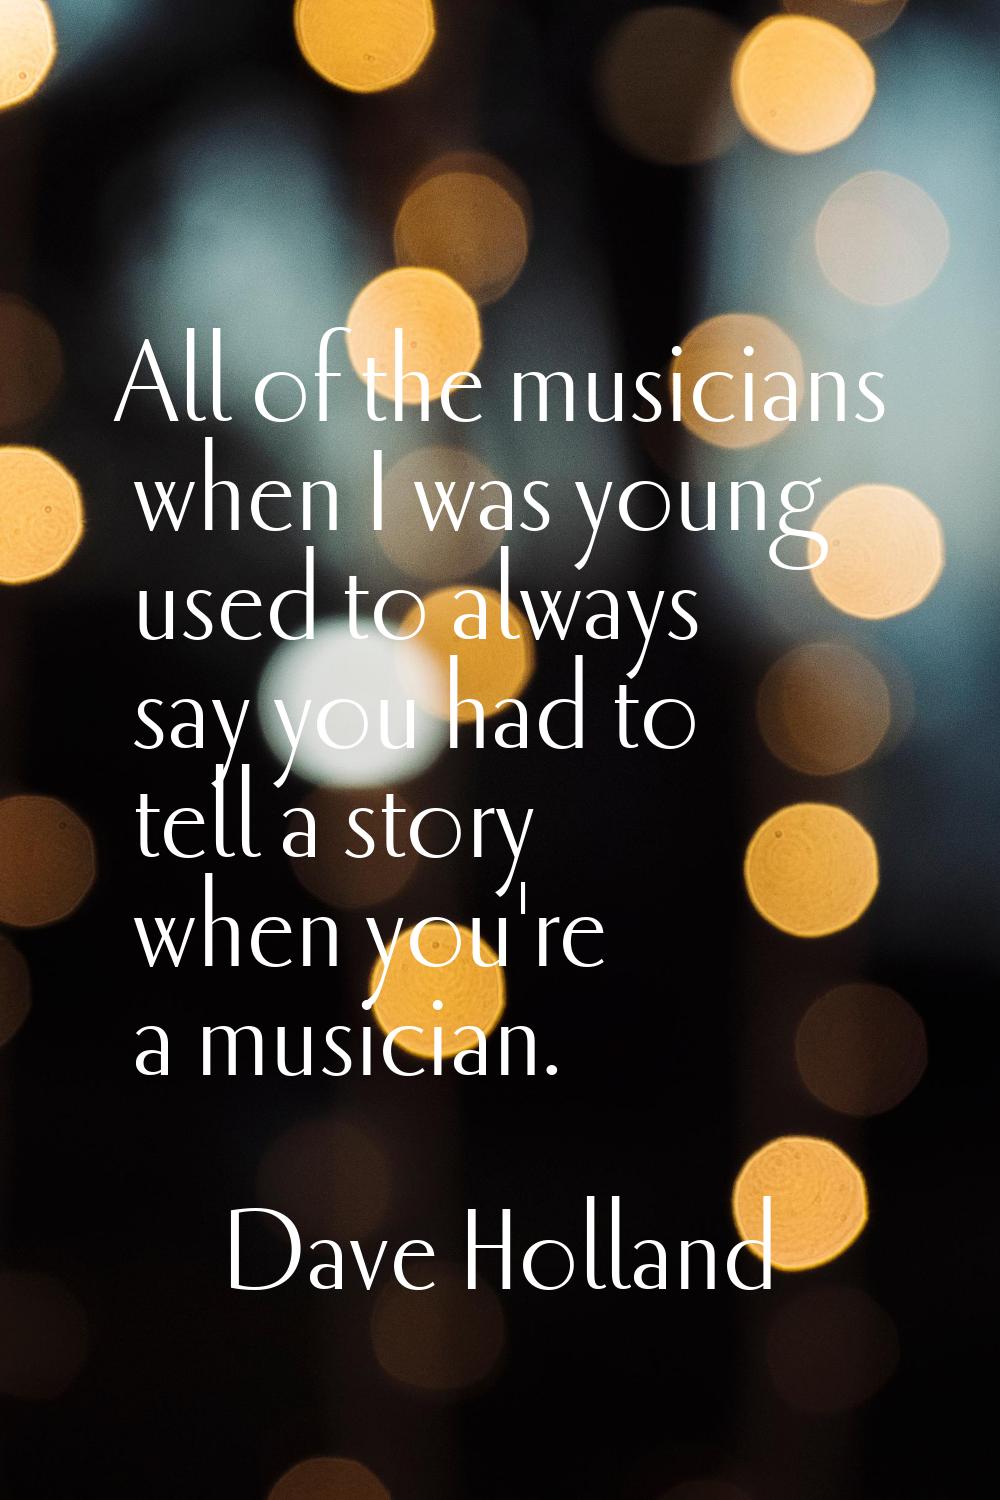 All of the musicians when I was young used to always say you had to tell a story when you're a musi